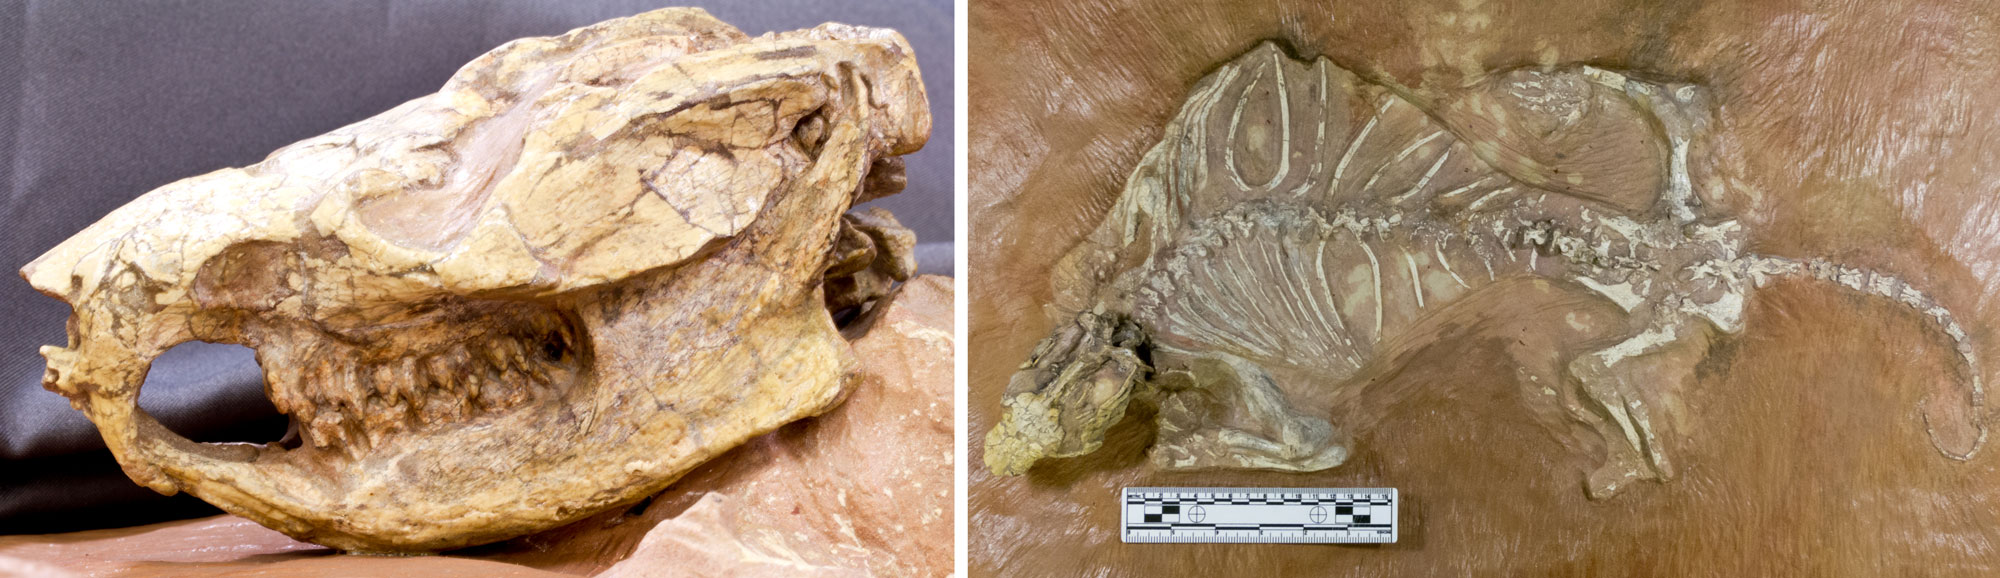 2-panel image showing photos of a fossil of the Jurassic mammal-like reptile Kayentatherium from Arizona. Panel 1: Photo of the skull showing long, rodent-like front teeth. Panel 2: Photo of the full skeleton partially embedded in rock matrix showing four legs and a medium-length tail.